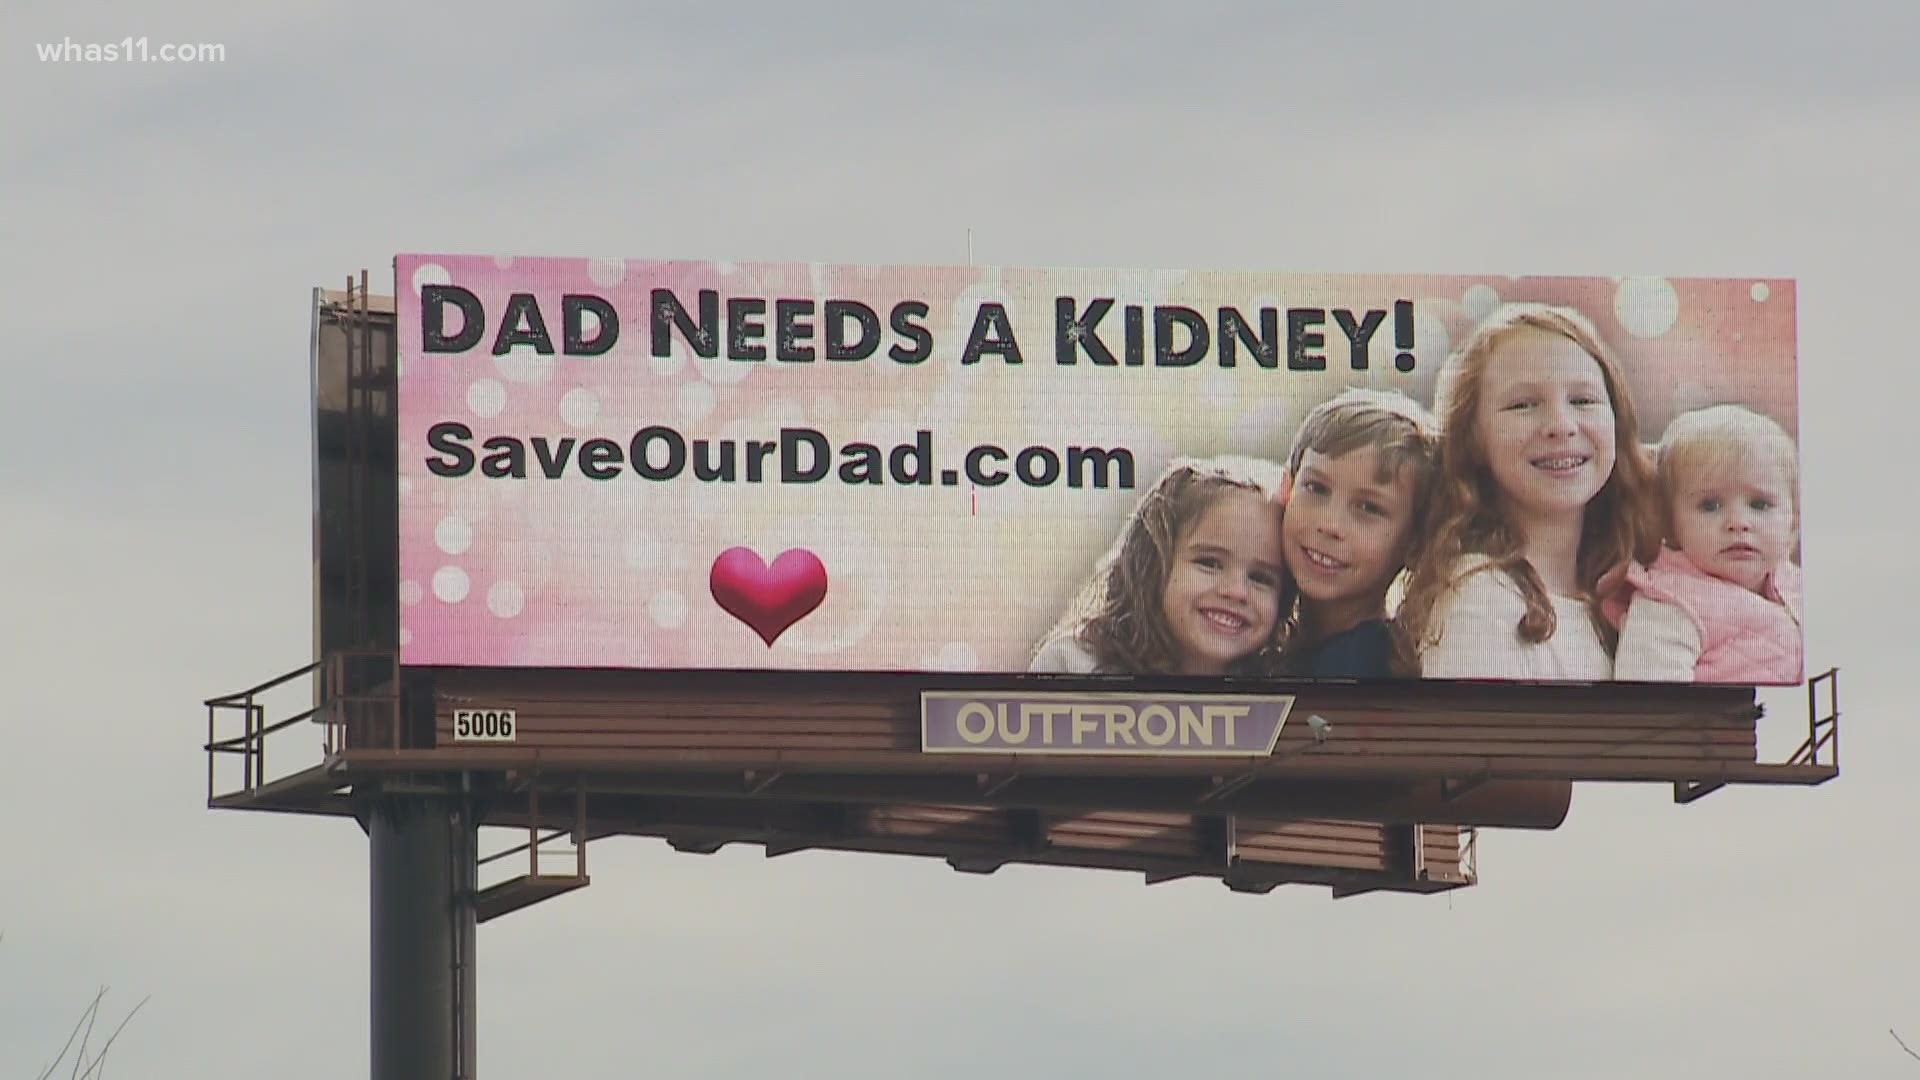 A Cincinnati family has put up a billboard near downtown Louisville in hopes of finding a kidney donor for their father.